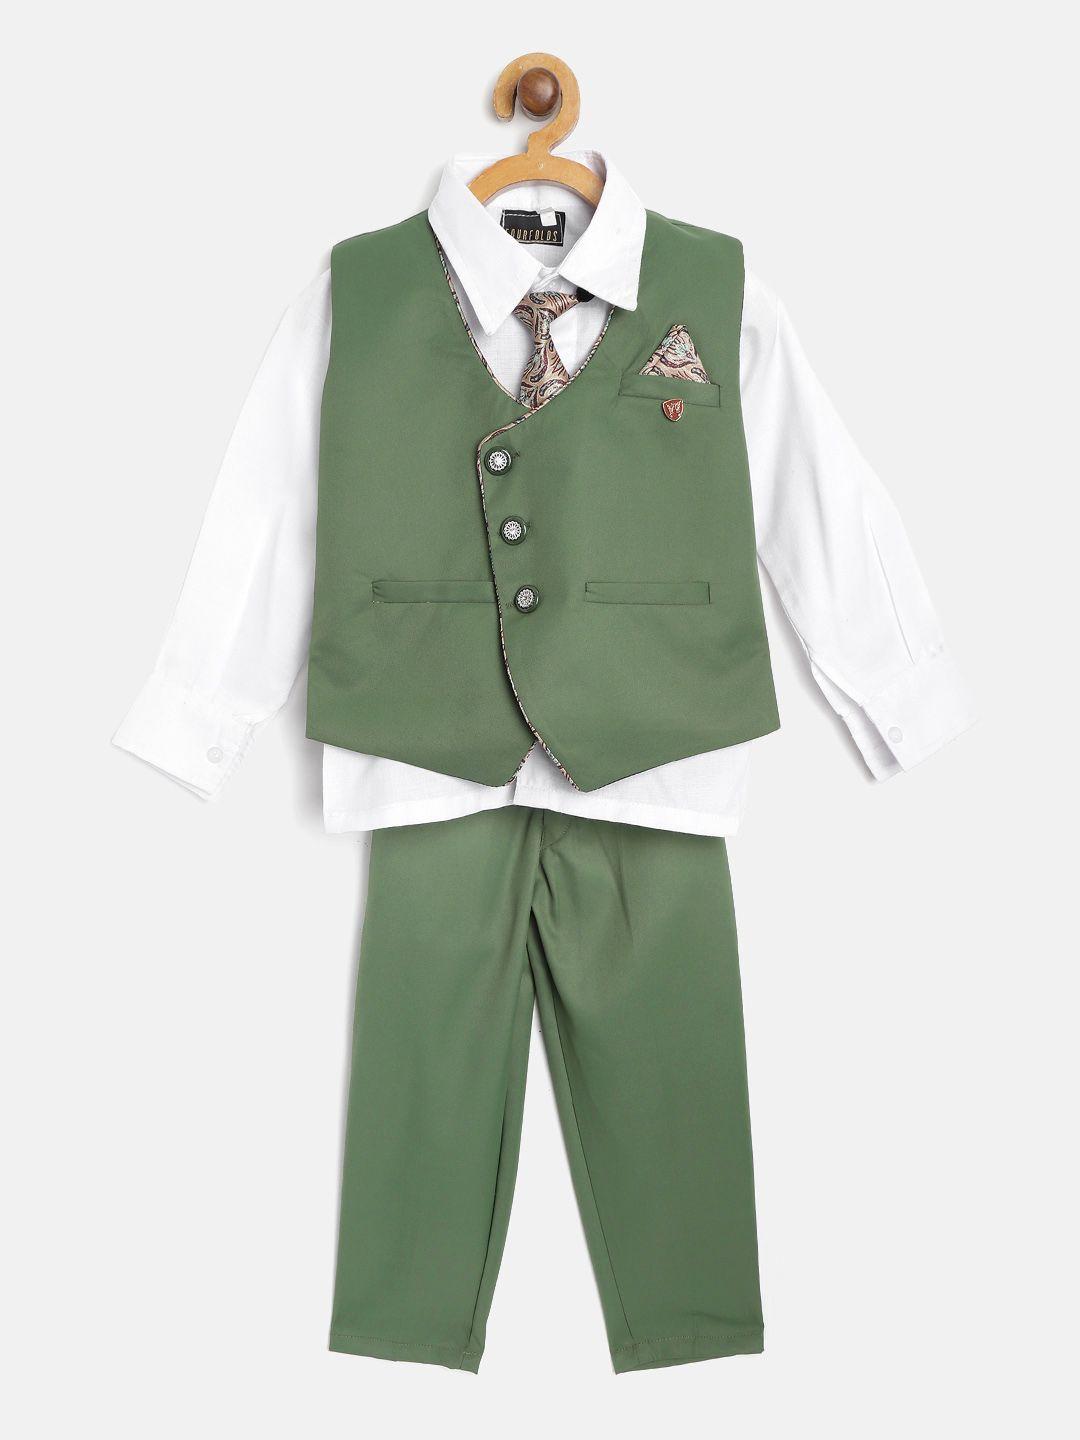 FOURFOLDS Boys Olive Green & White Solid Clothing Set with Waistcoat, Tie & Cloth Mask